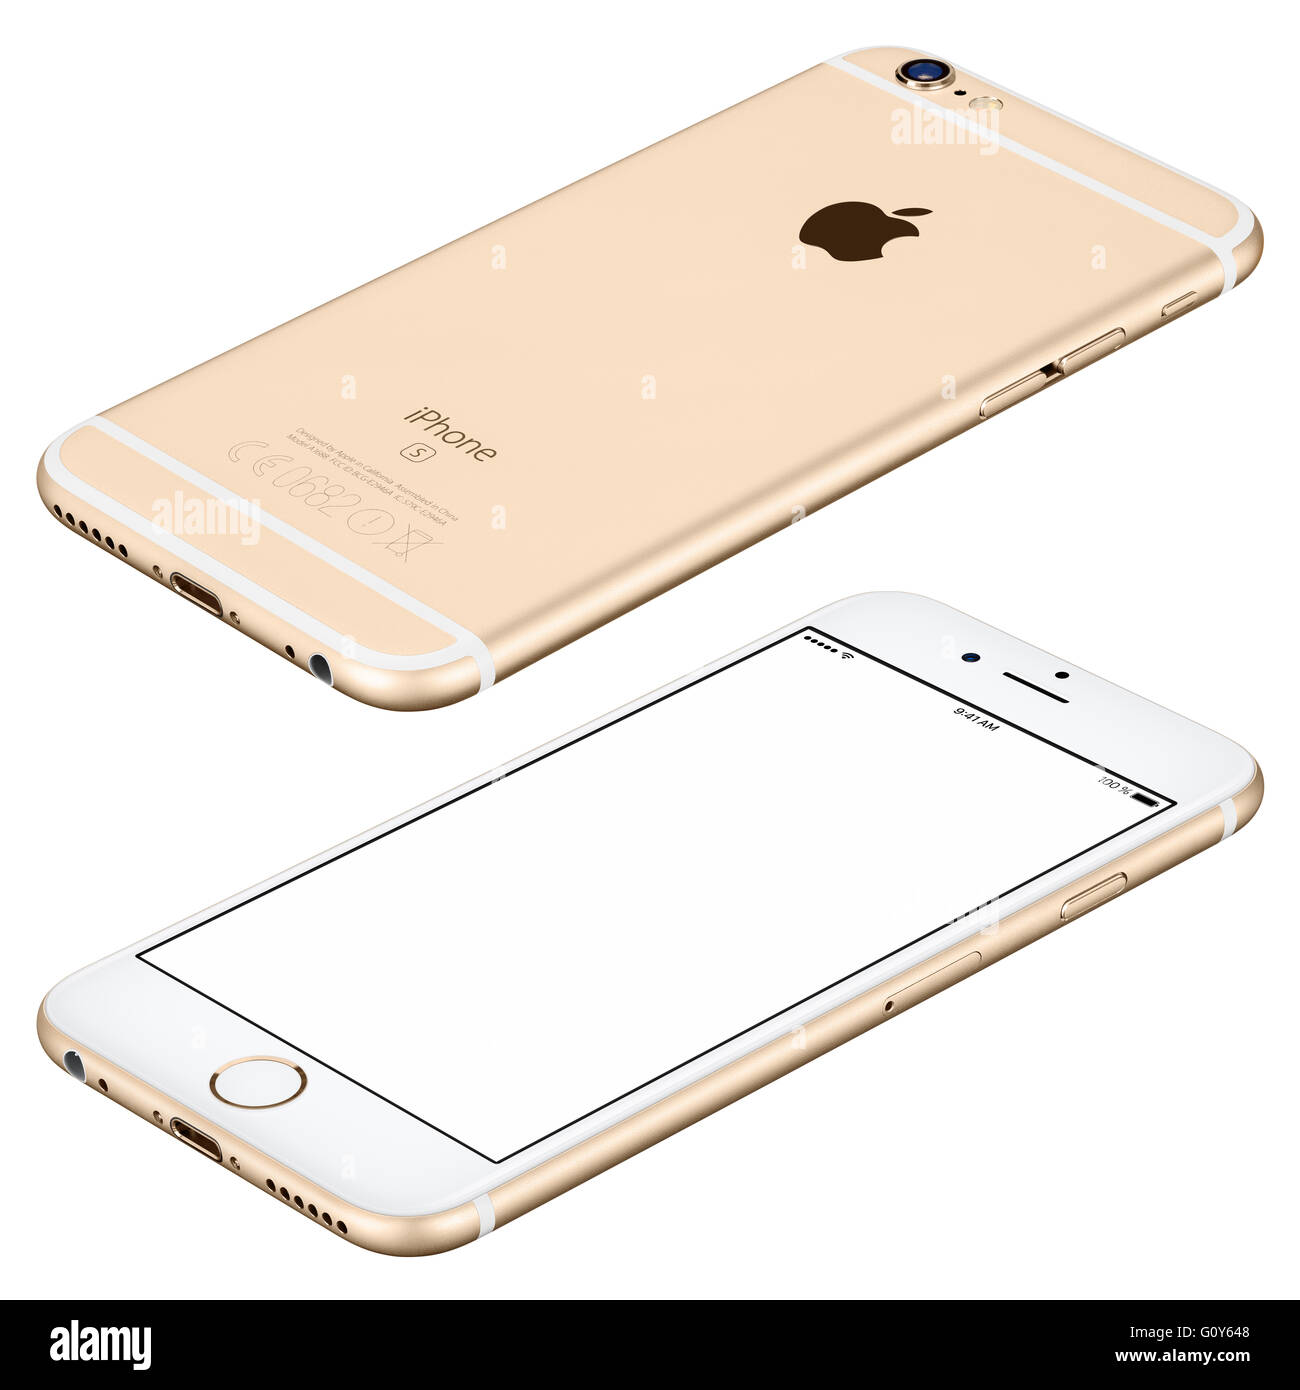 Varna, Bulgaria - October 25, 2015: Gold Apple iPhone 6s mockup lies on the surface clockwise rotated with white screen Stock Photo